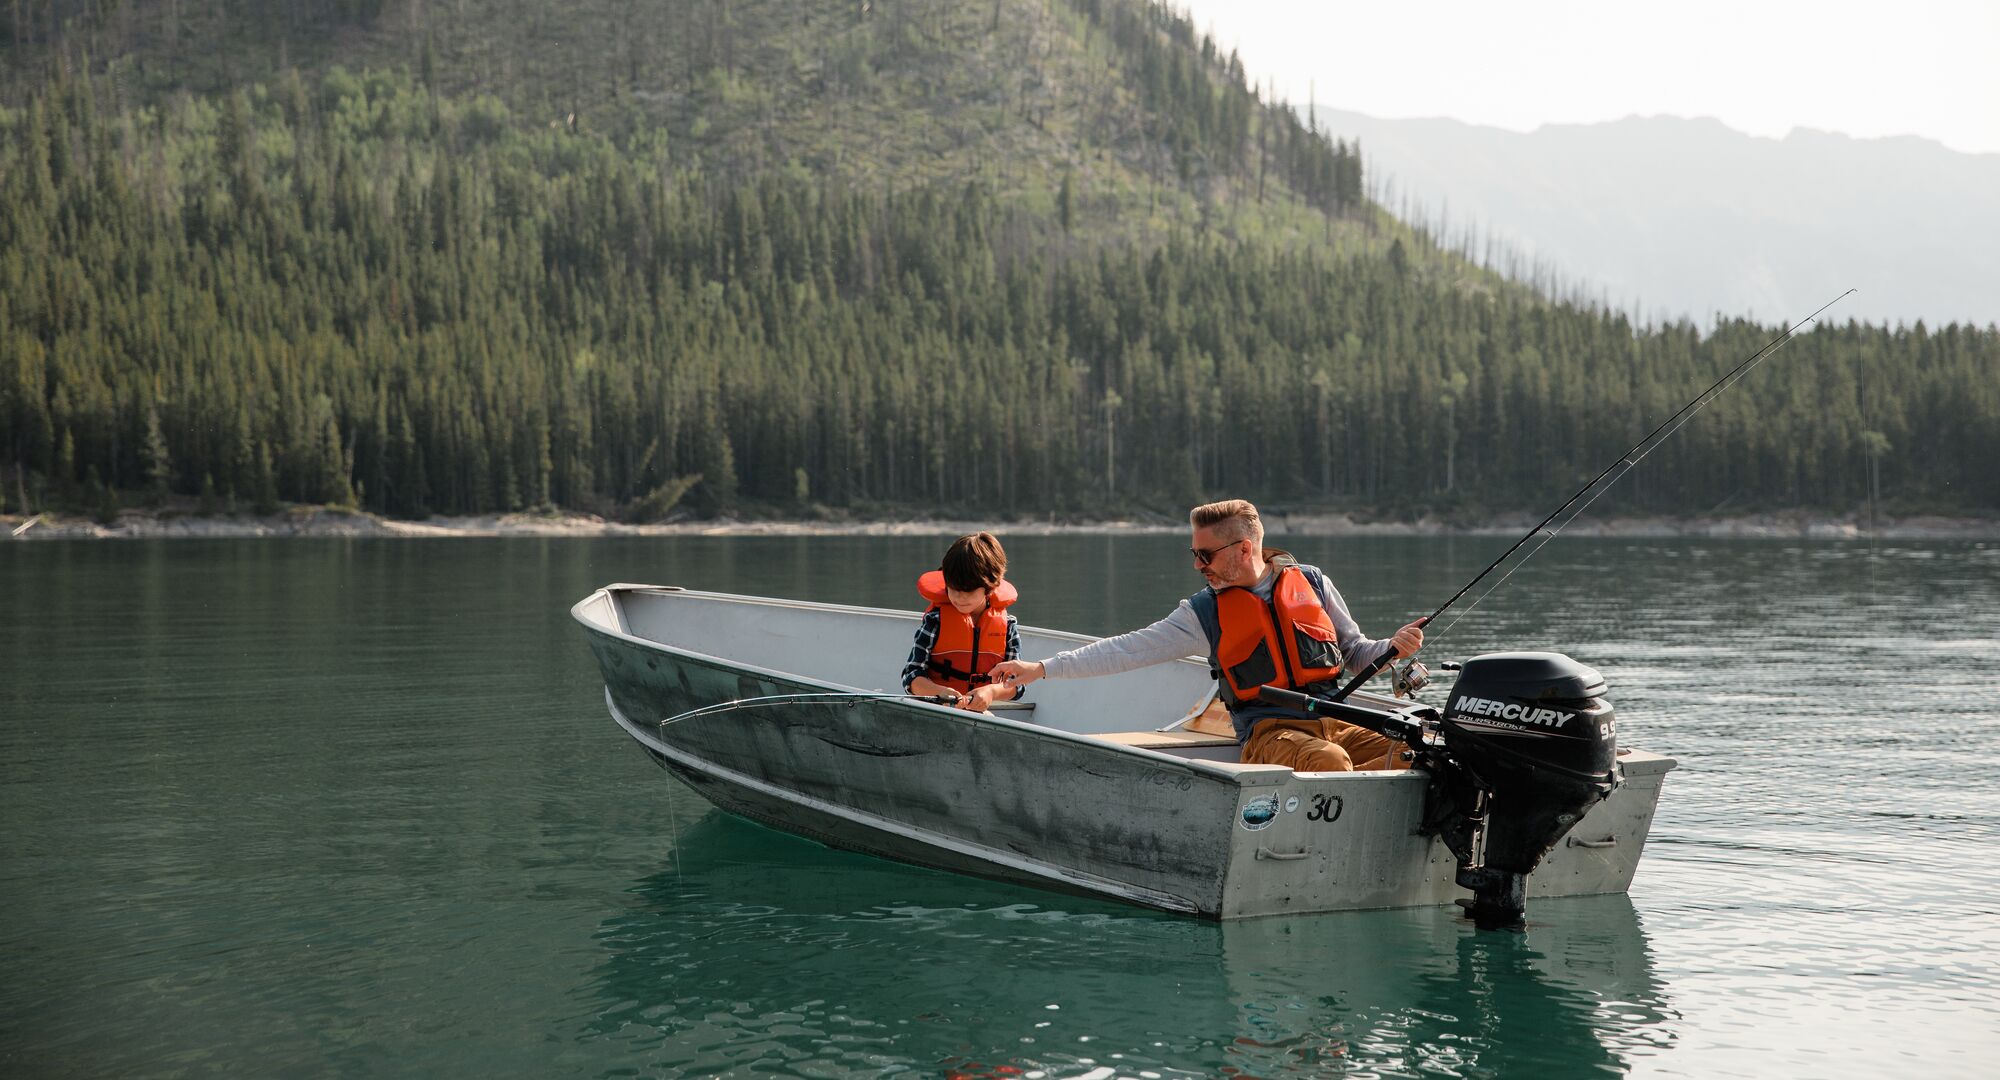 A father and son fishing on Lake Minnewanka in a small motor boat